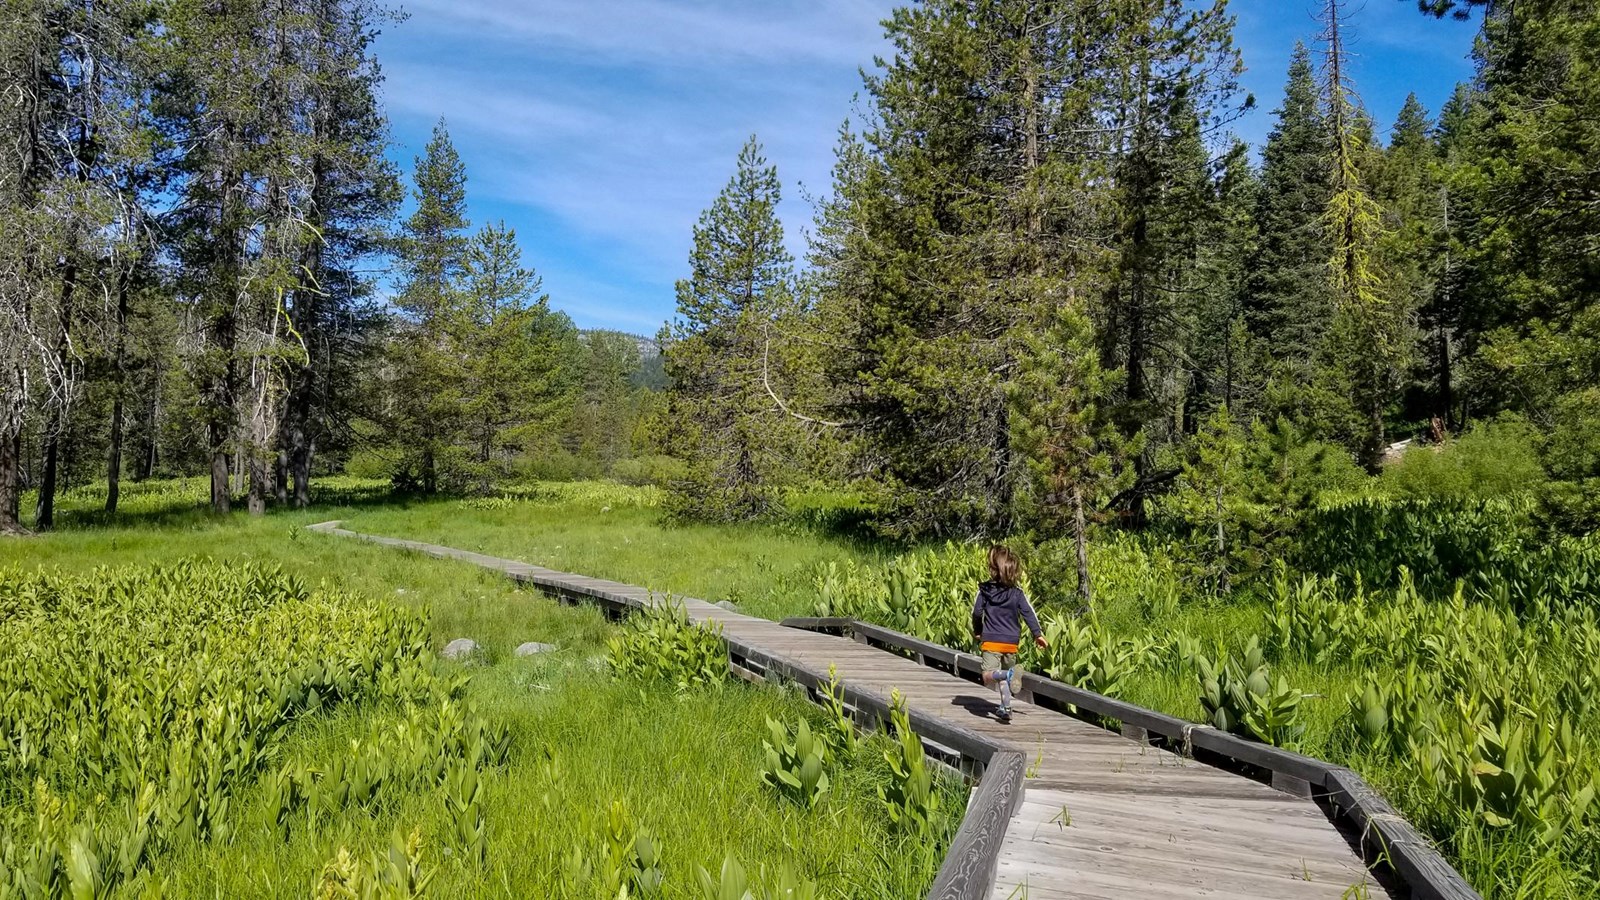 A child runs on a boardwalk through a green meadow lined by conifers.